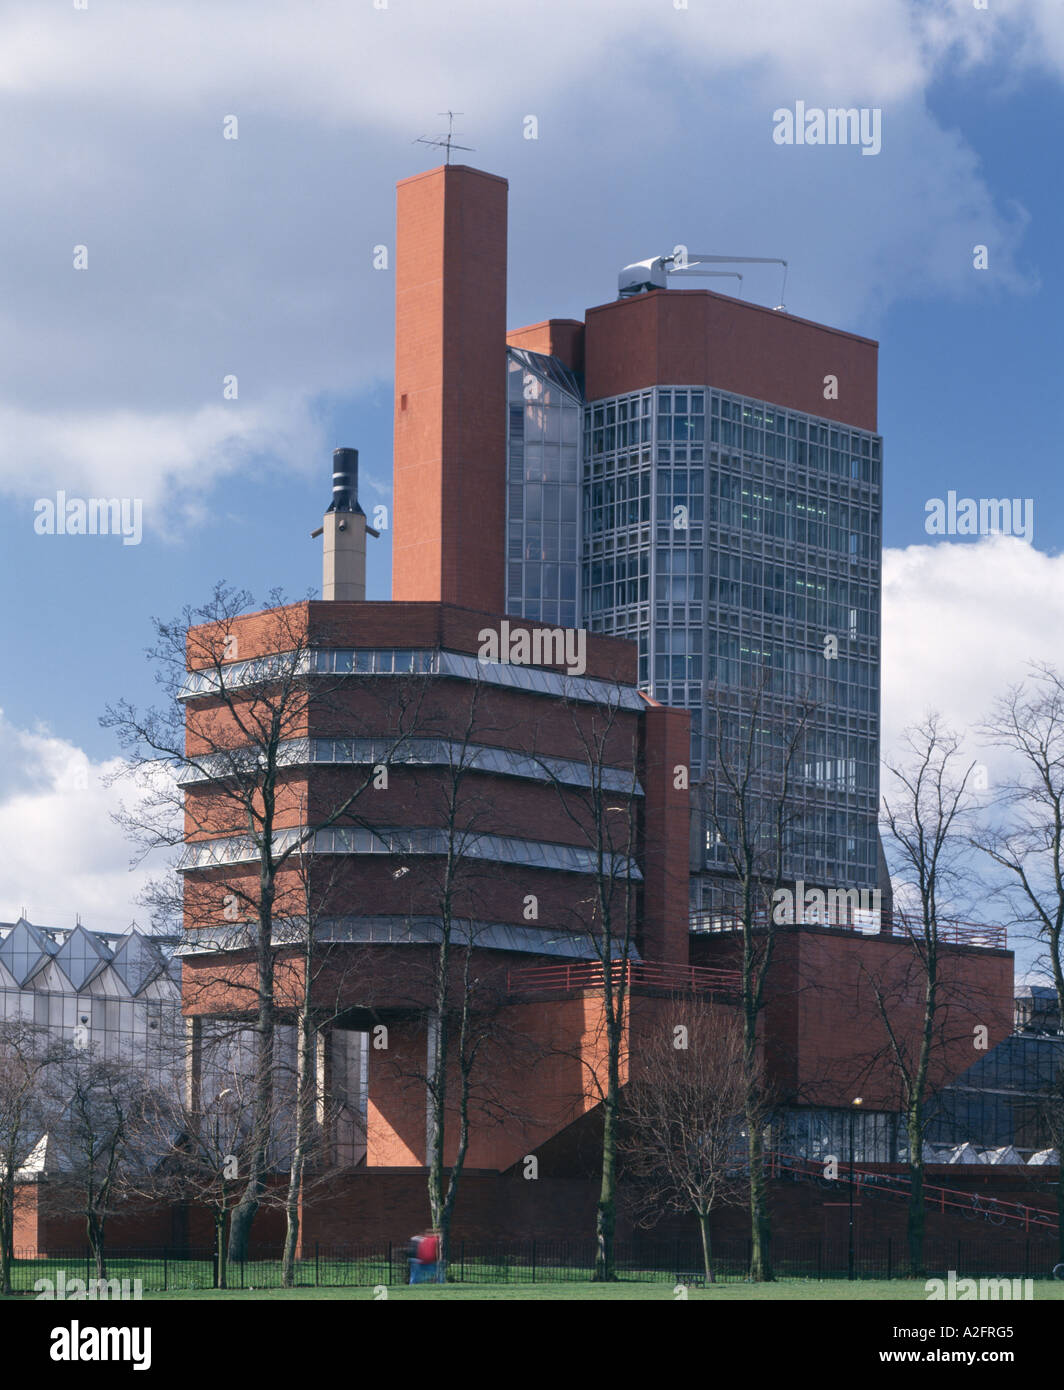 Leicester University Faculty of Engineering, England, 1959 - 1963. Exterior of office and laboratory tower. Stock Photo